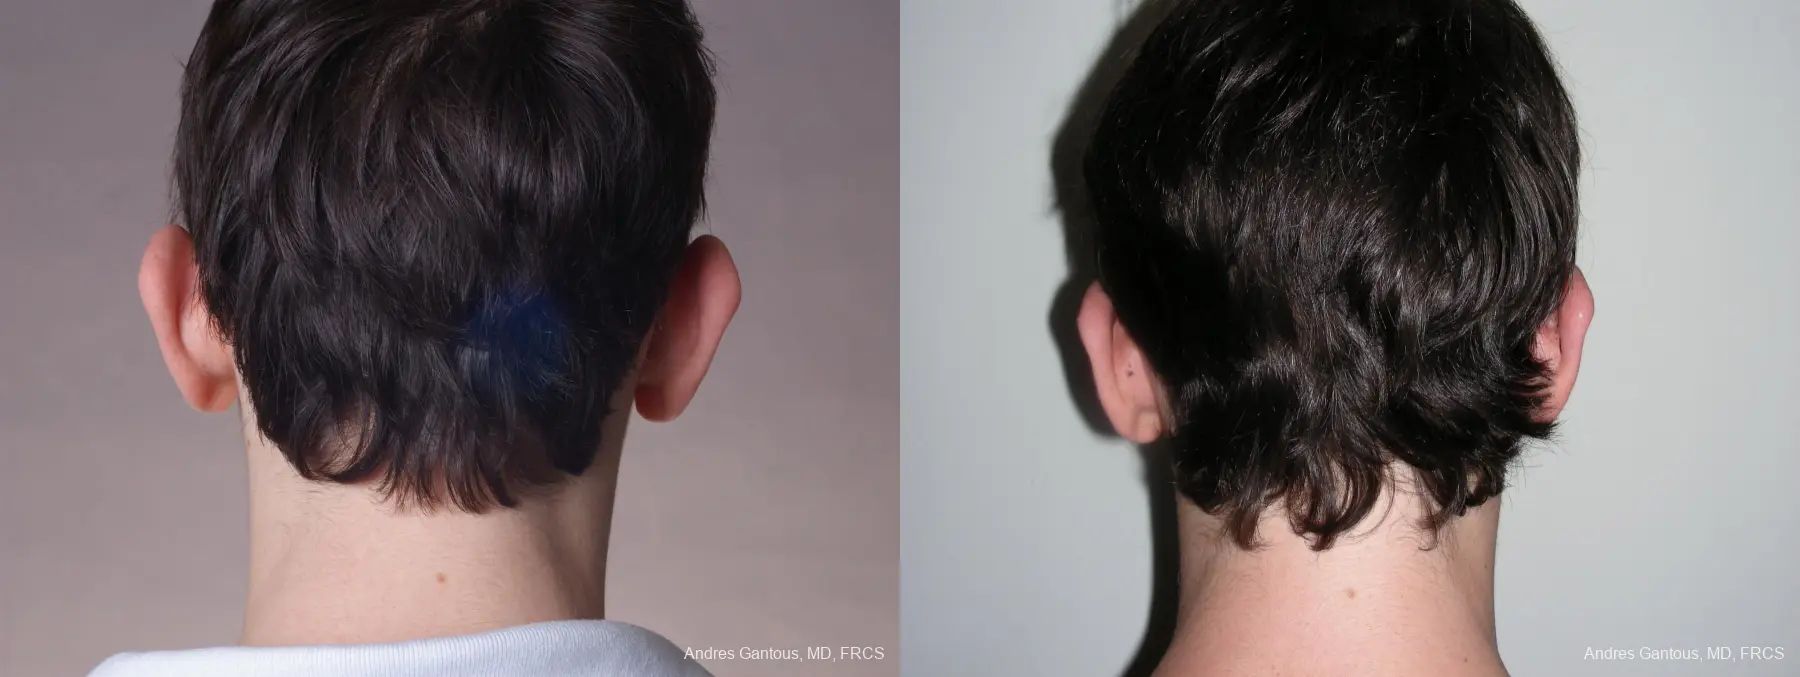 Otoplasty And Earlobe Repair: Patient 3 - Before and After 6